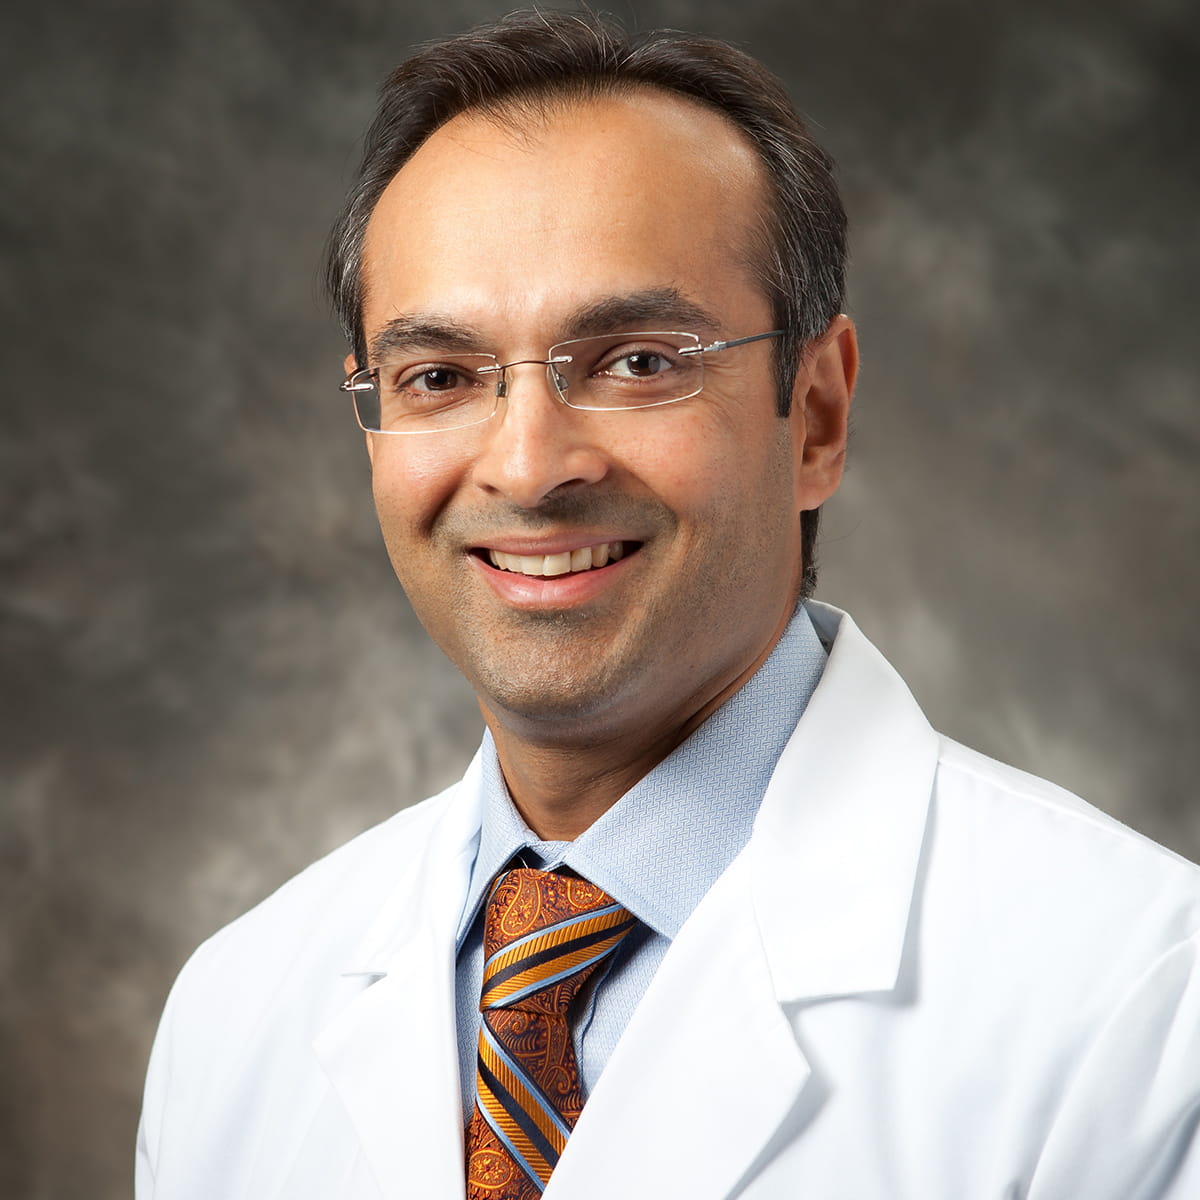 A friendly headshot of Dhaval Patel, MD